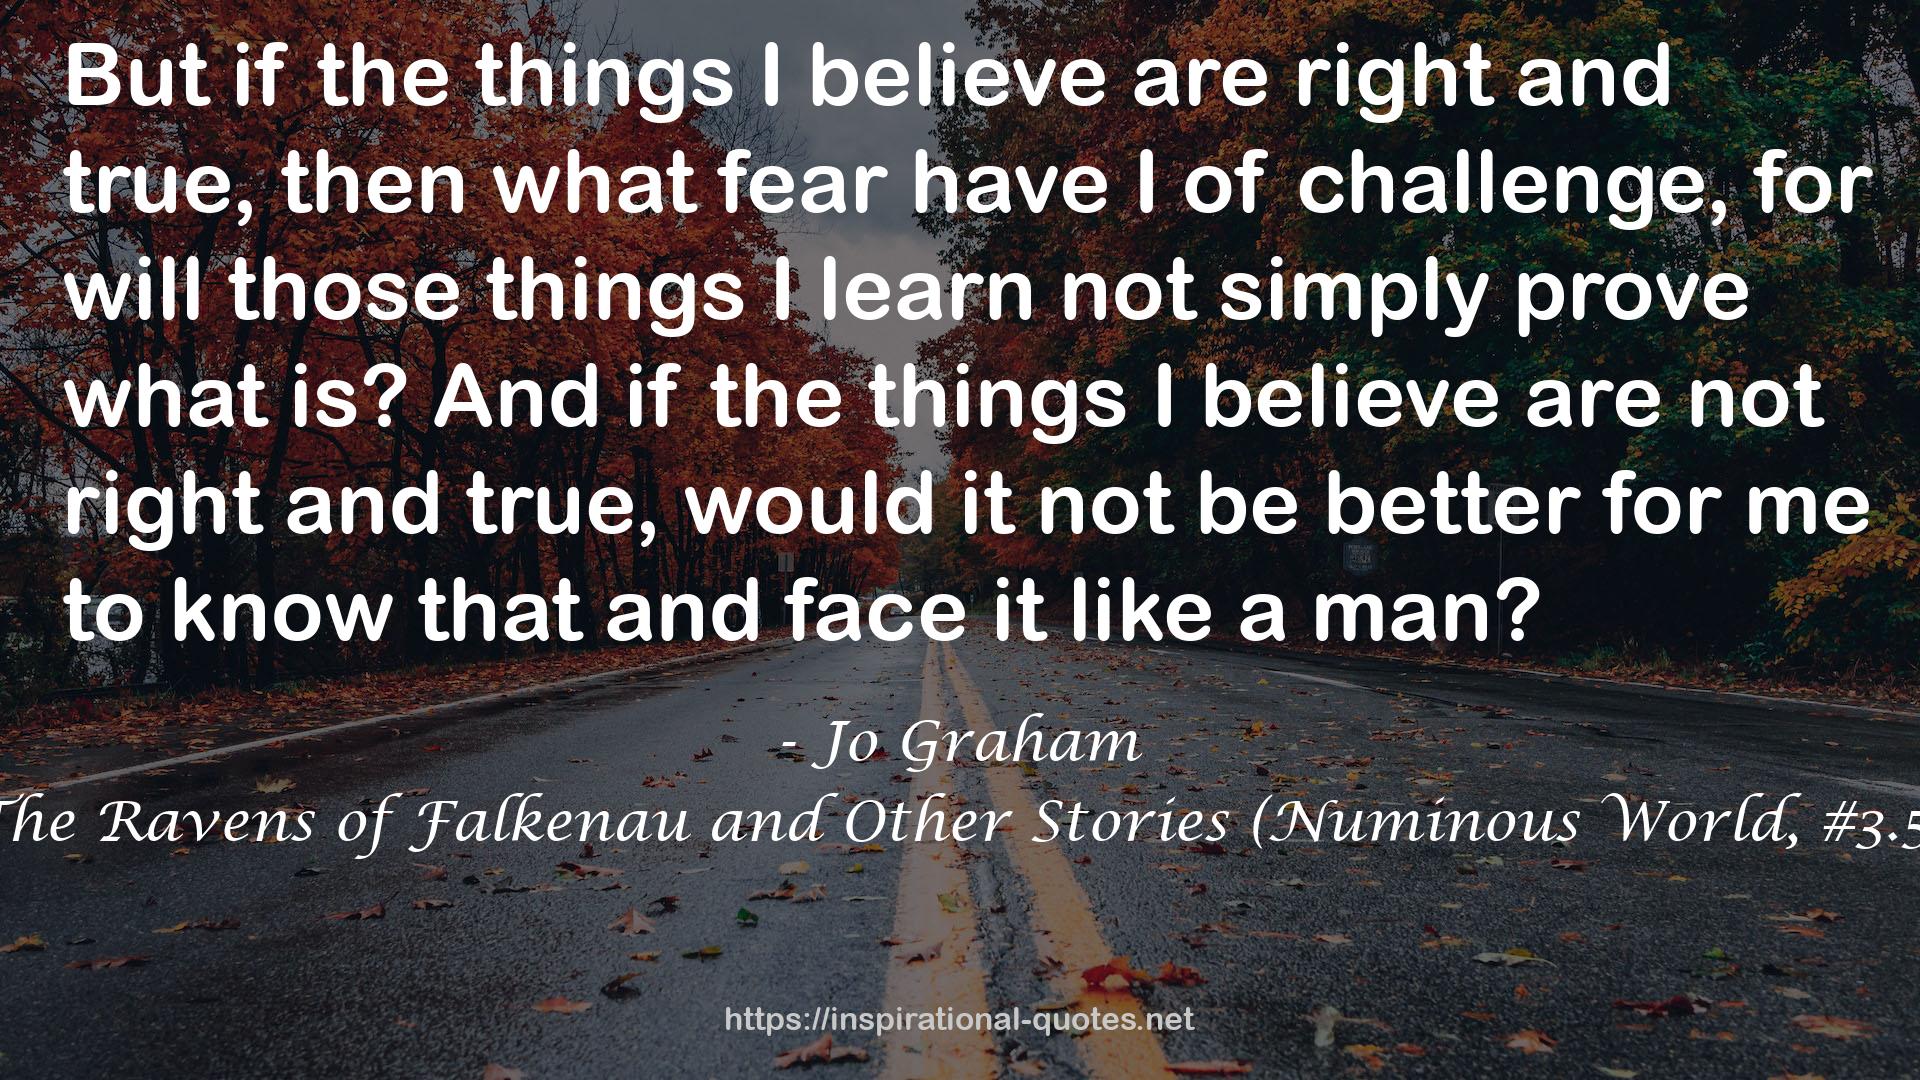 The Ravens of Falkenau and Other Stories (Numinous World, #3.5) QUOTES